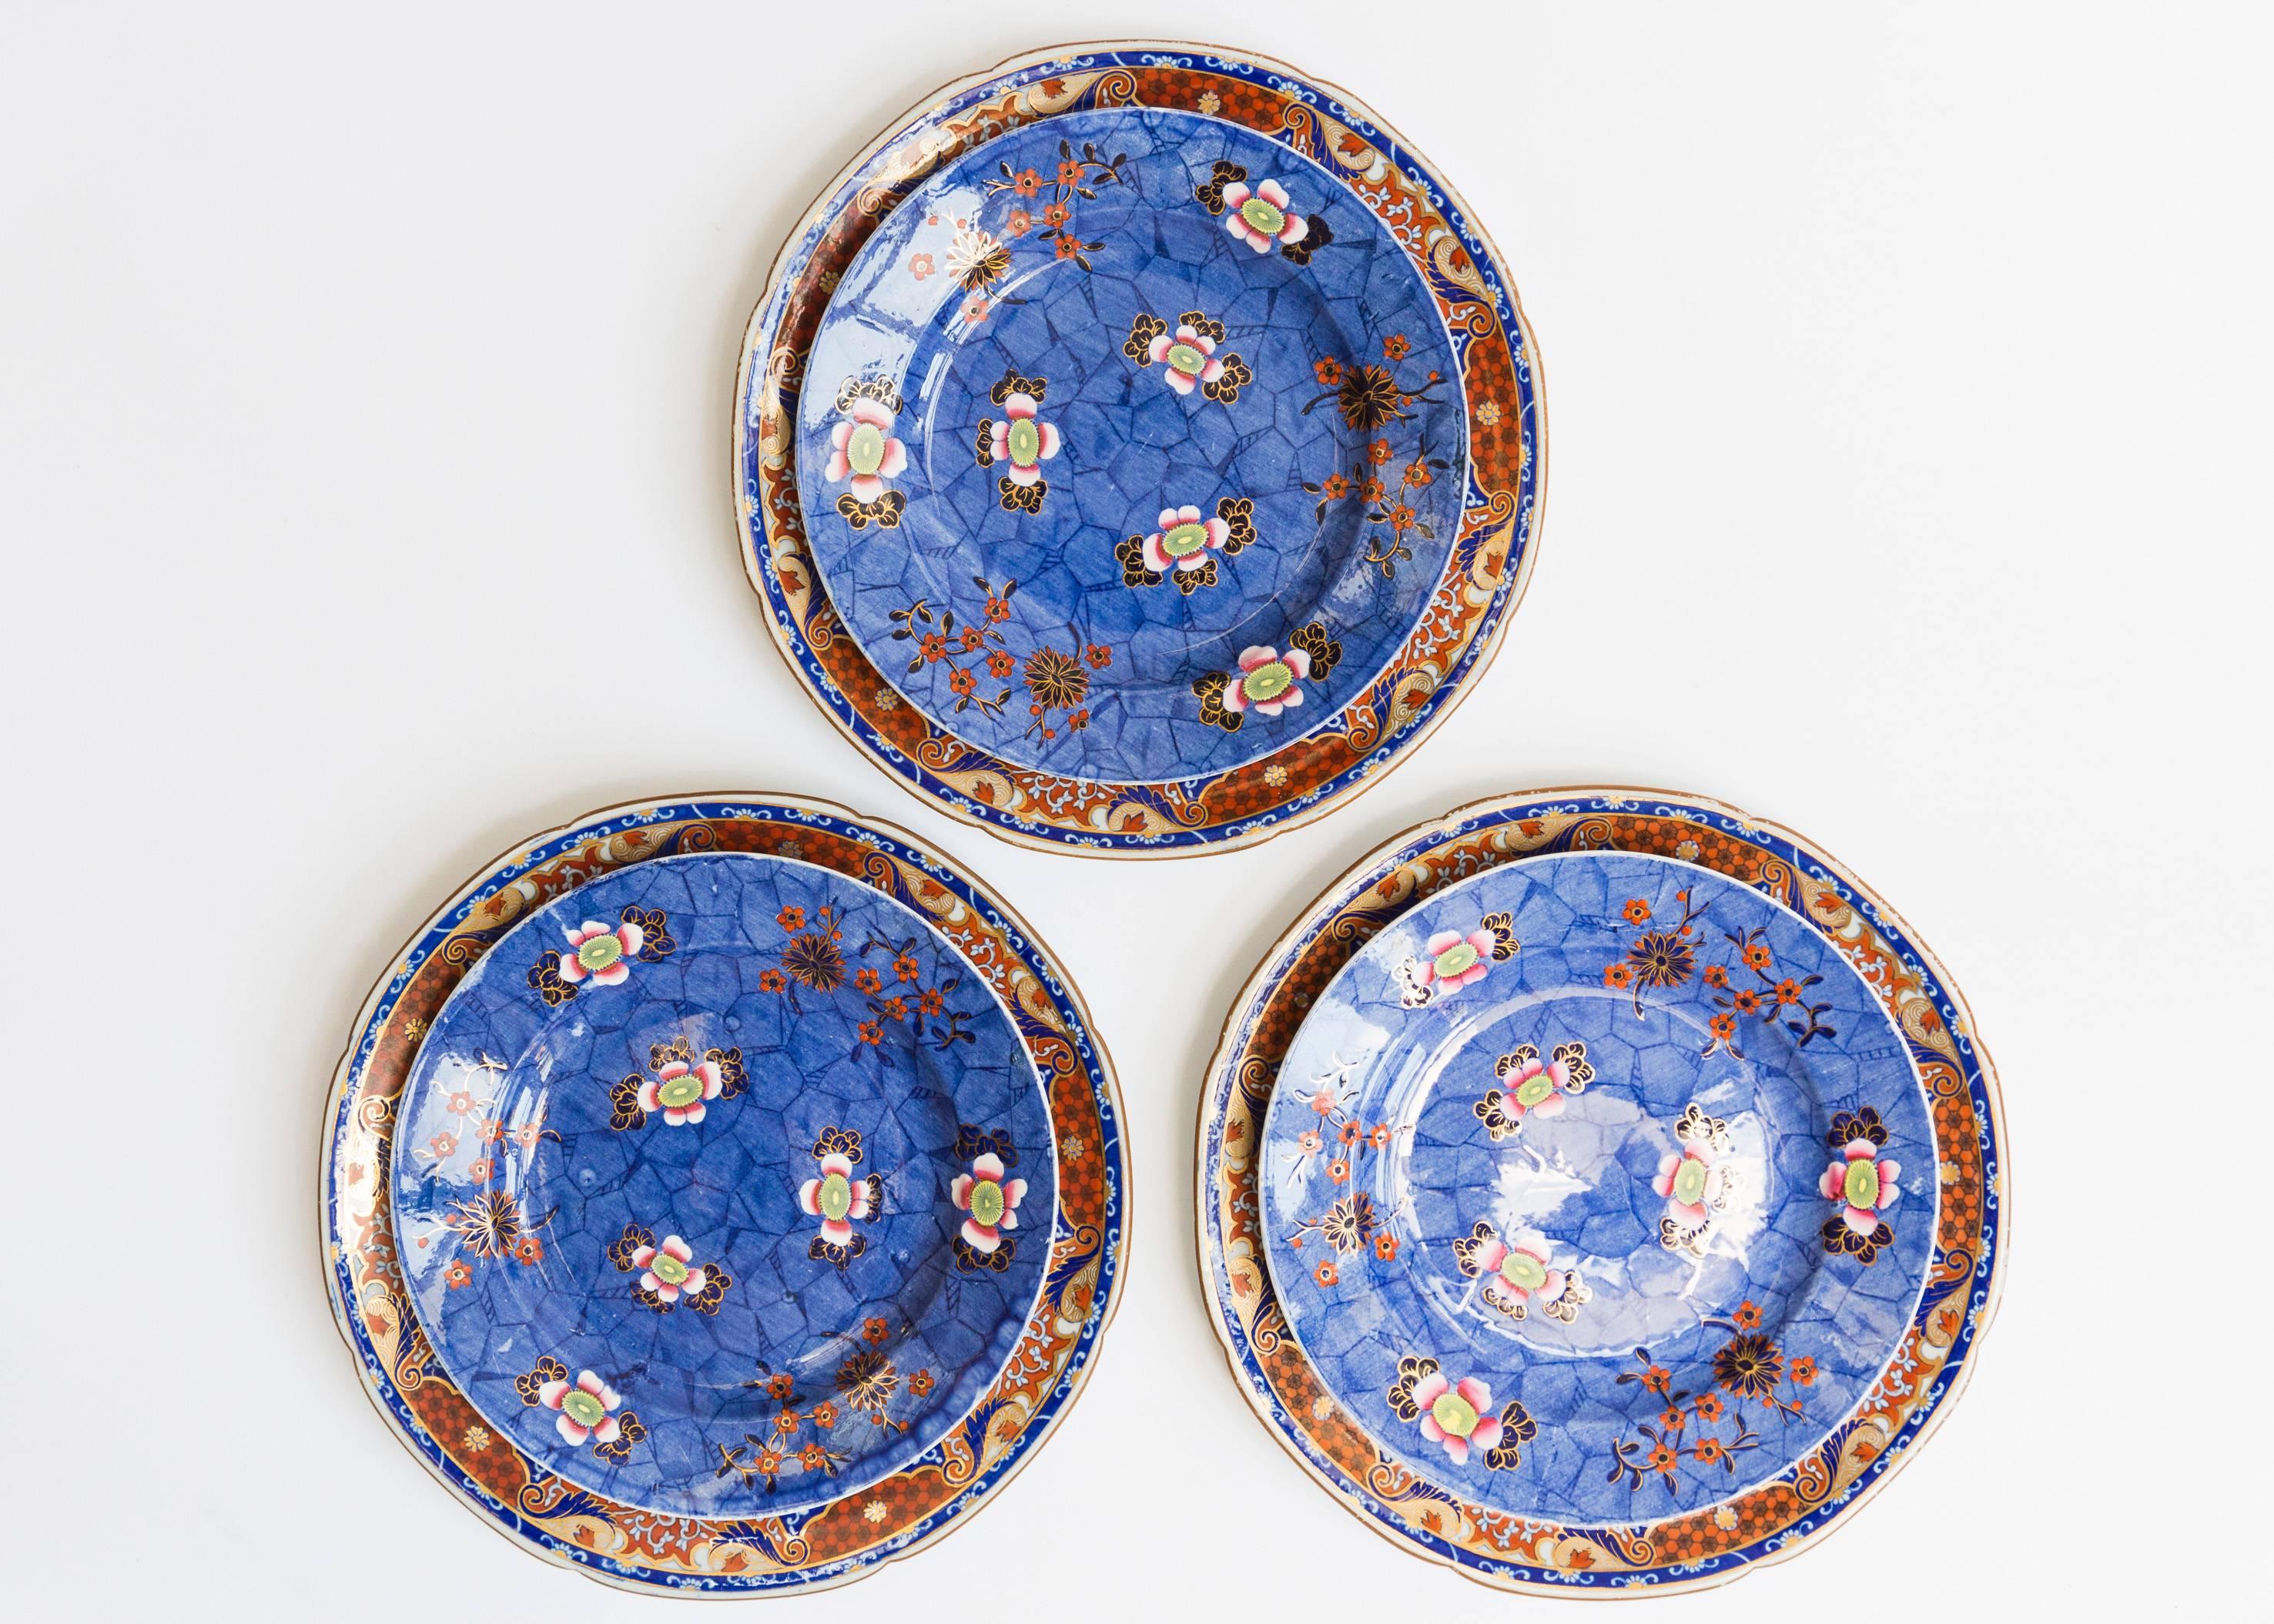 These plates were made in the early 20th century by Spode. The six plates come in two different styles and dimensions. The three larger plates have a white ceramic base and are intricately painted with ornate blue, red and gold painterly motifs. The